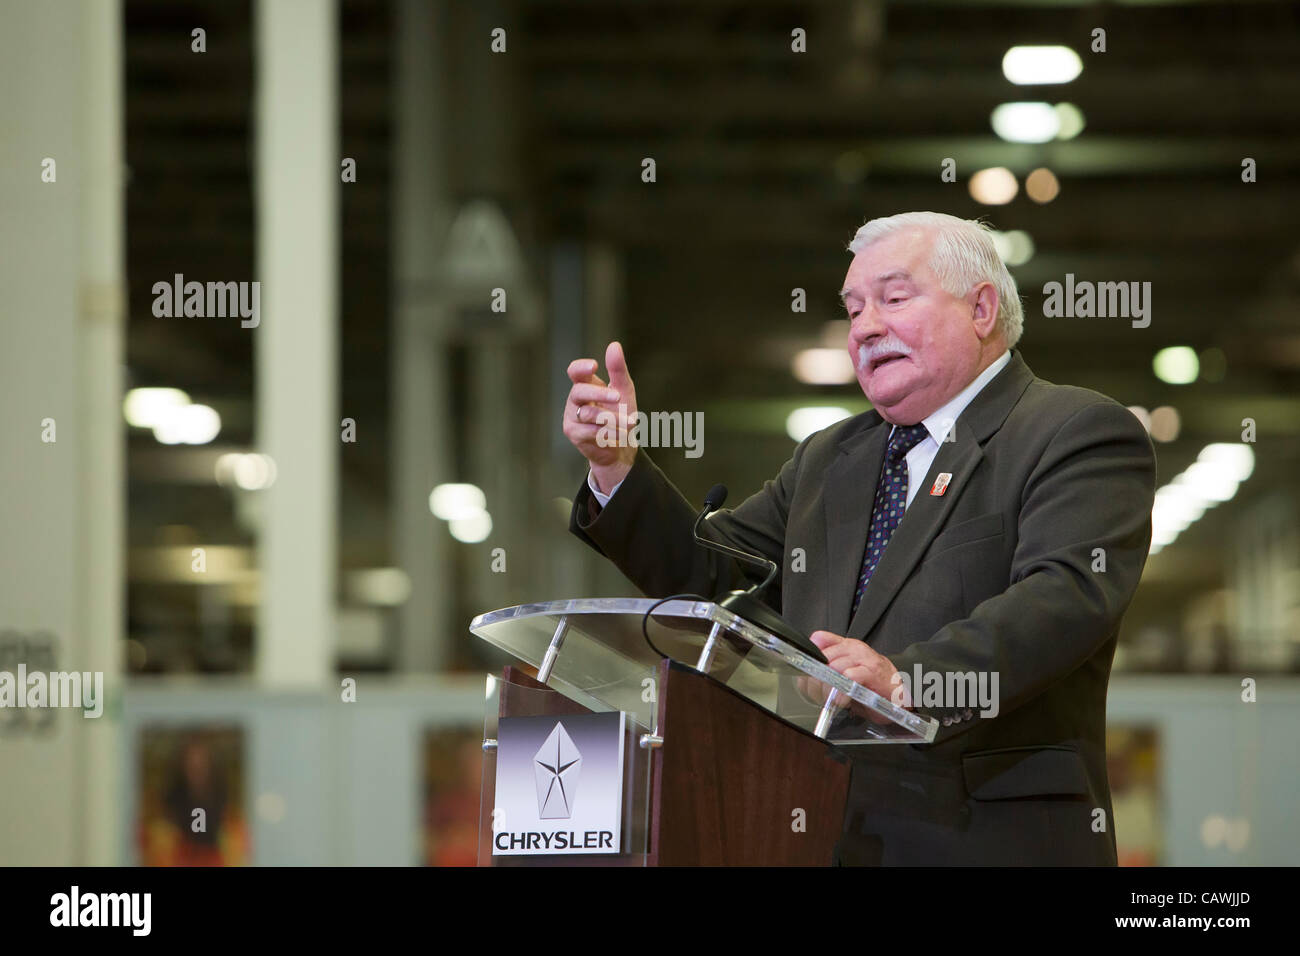 Detroit, Michigan - Lech Walesa speaks during a visit to Chrysler's Jefferson North Assembly Plant. Walesa was a founder of the Solidarity trade union movement in Poland in 1980 and was elected president of Poland in 1990. He was awarded the Nobel Peace Prize in 1983. Stock Photo